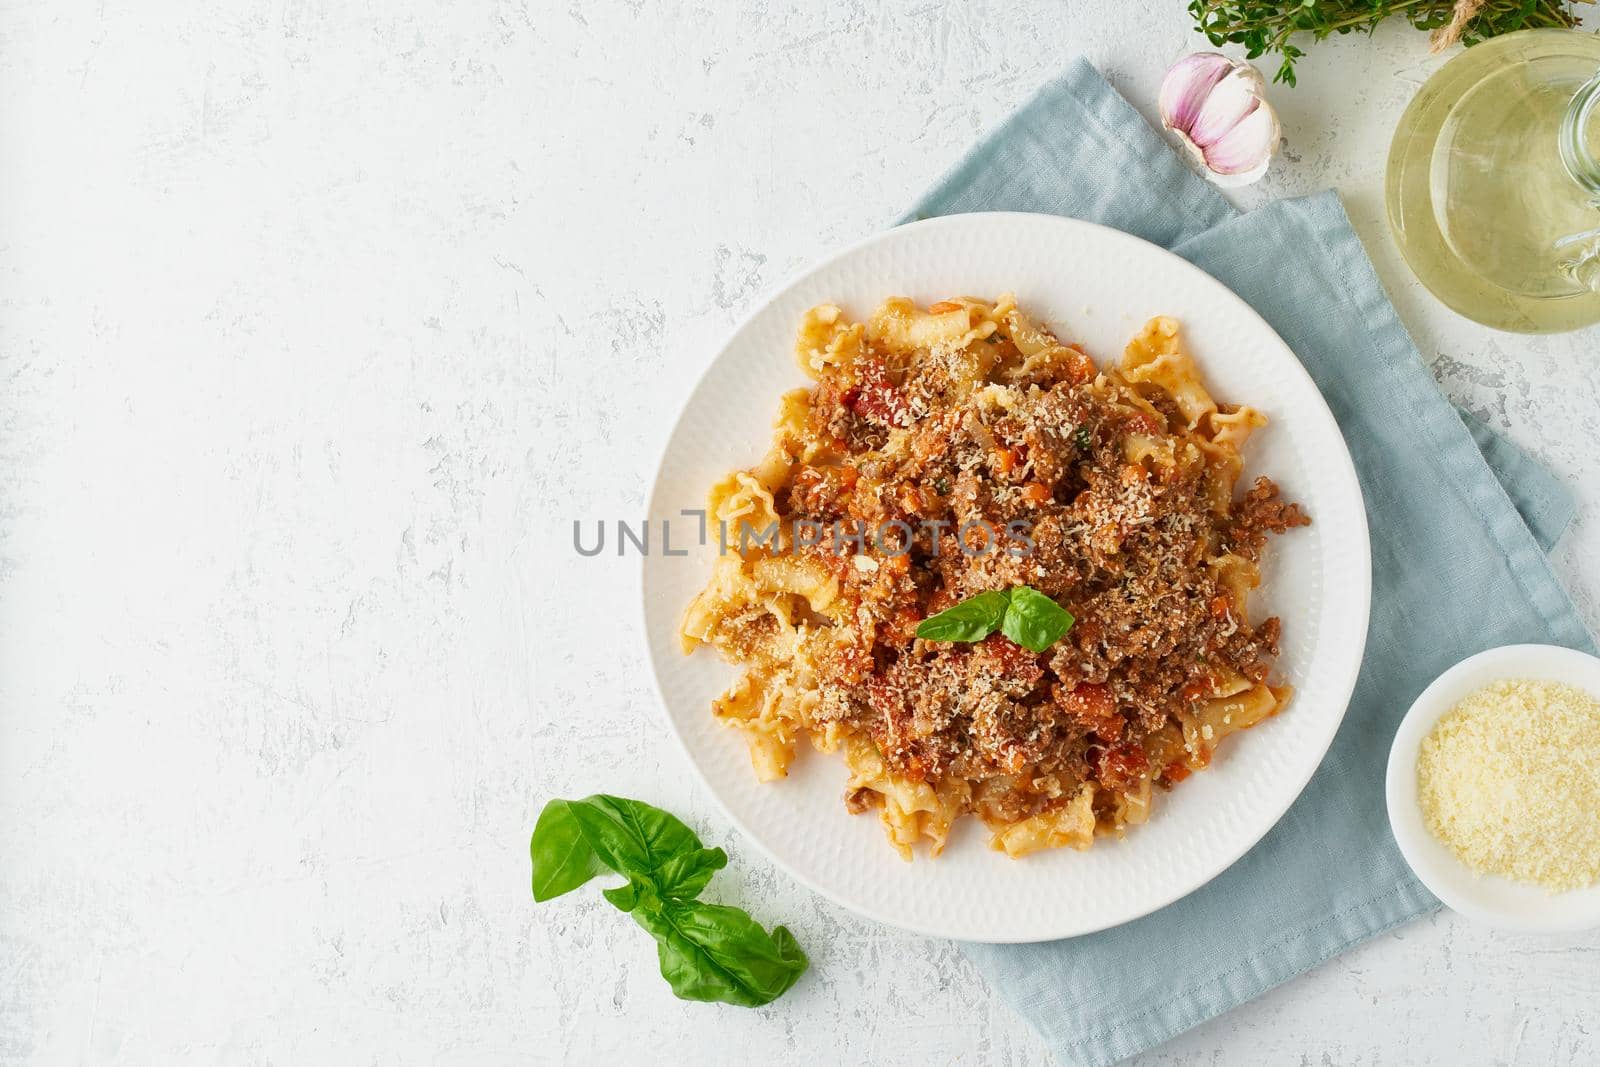 Pasta Bolognese campanelle with mincemeat and tomato sauce by NataBene